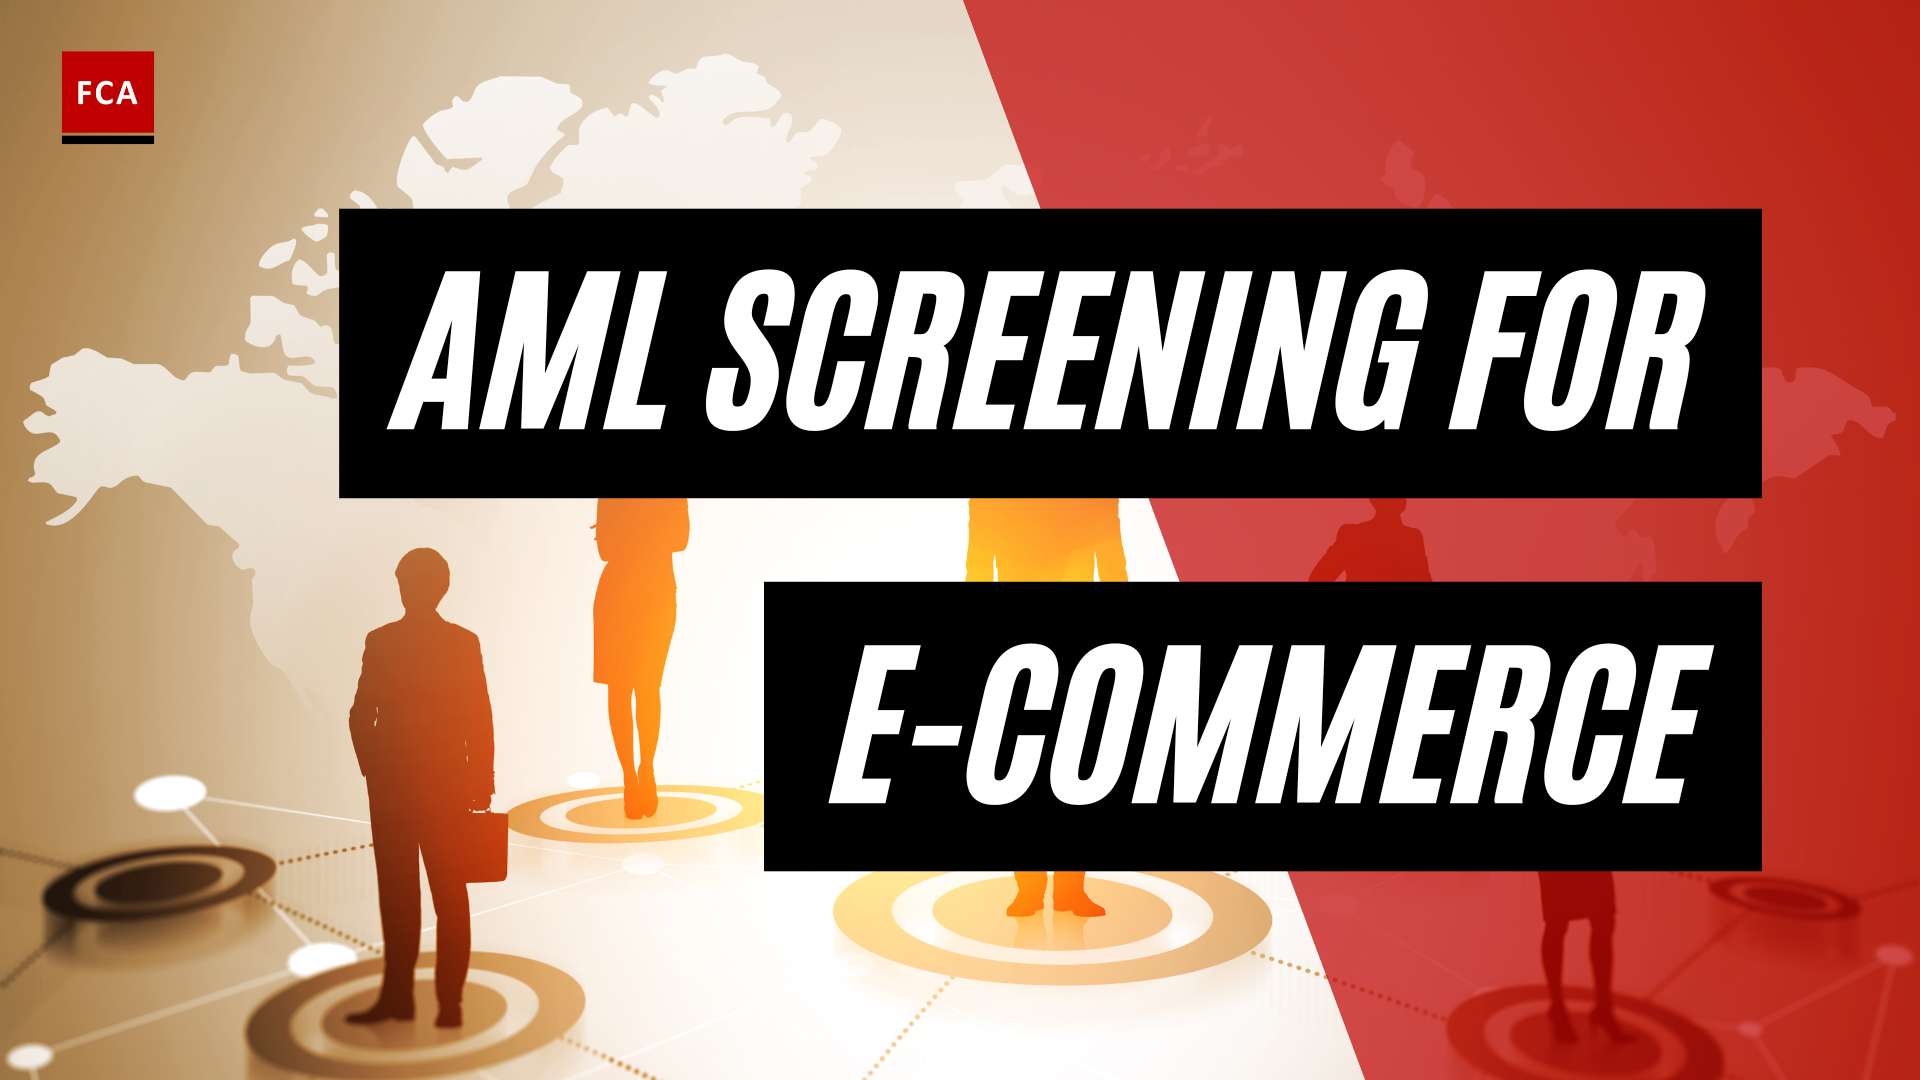 Boosting Confidence: Aml Screening For Trustworthy E-Commerce Transactions